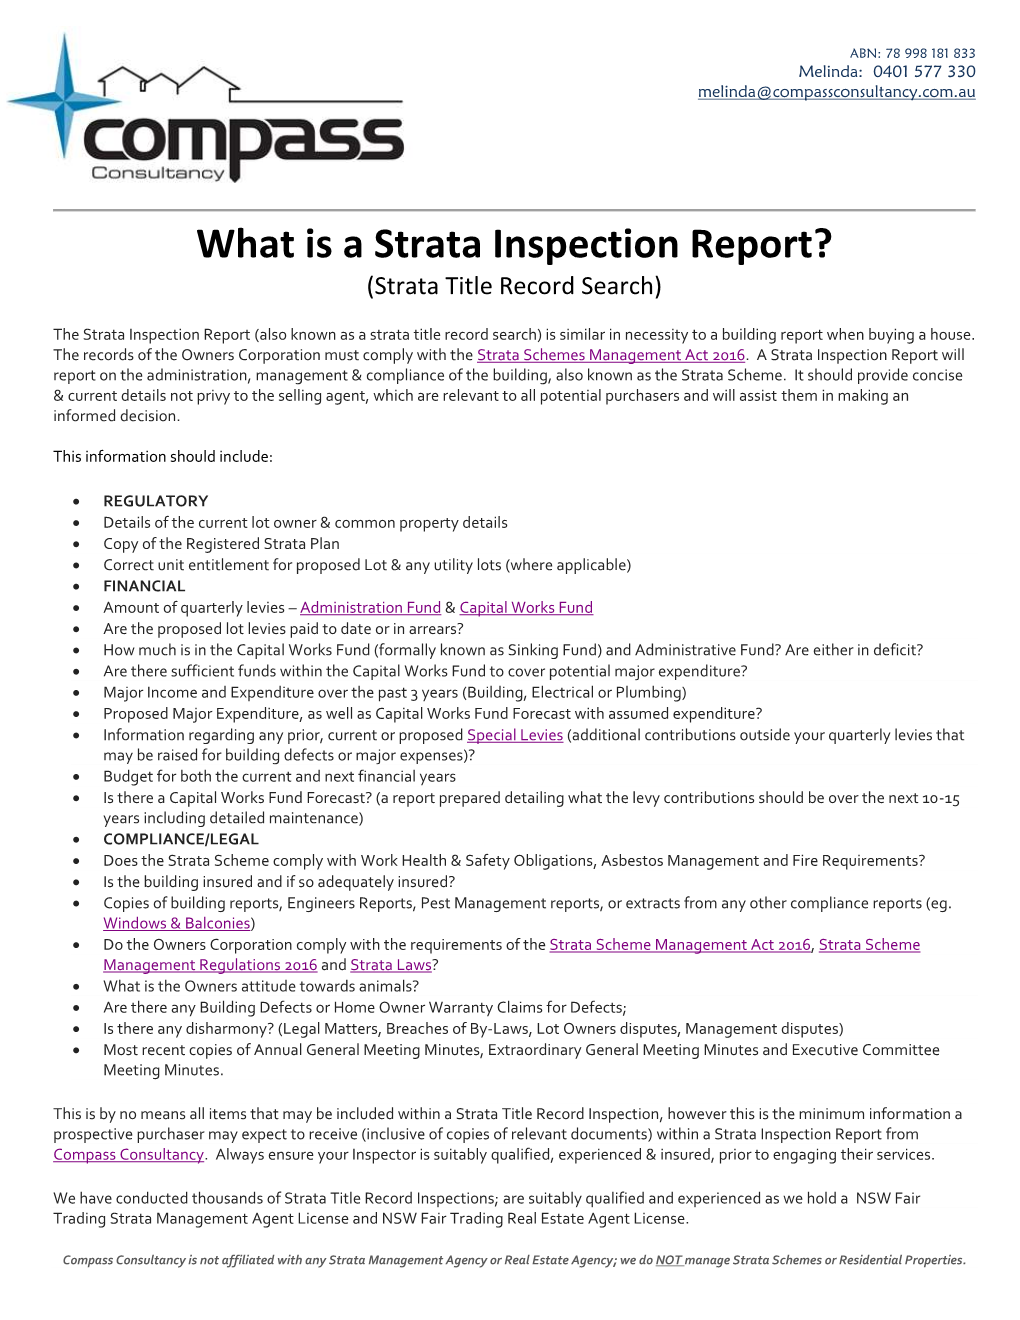 What Is a Strata Inspection Report? (Strata Title Record Search)